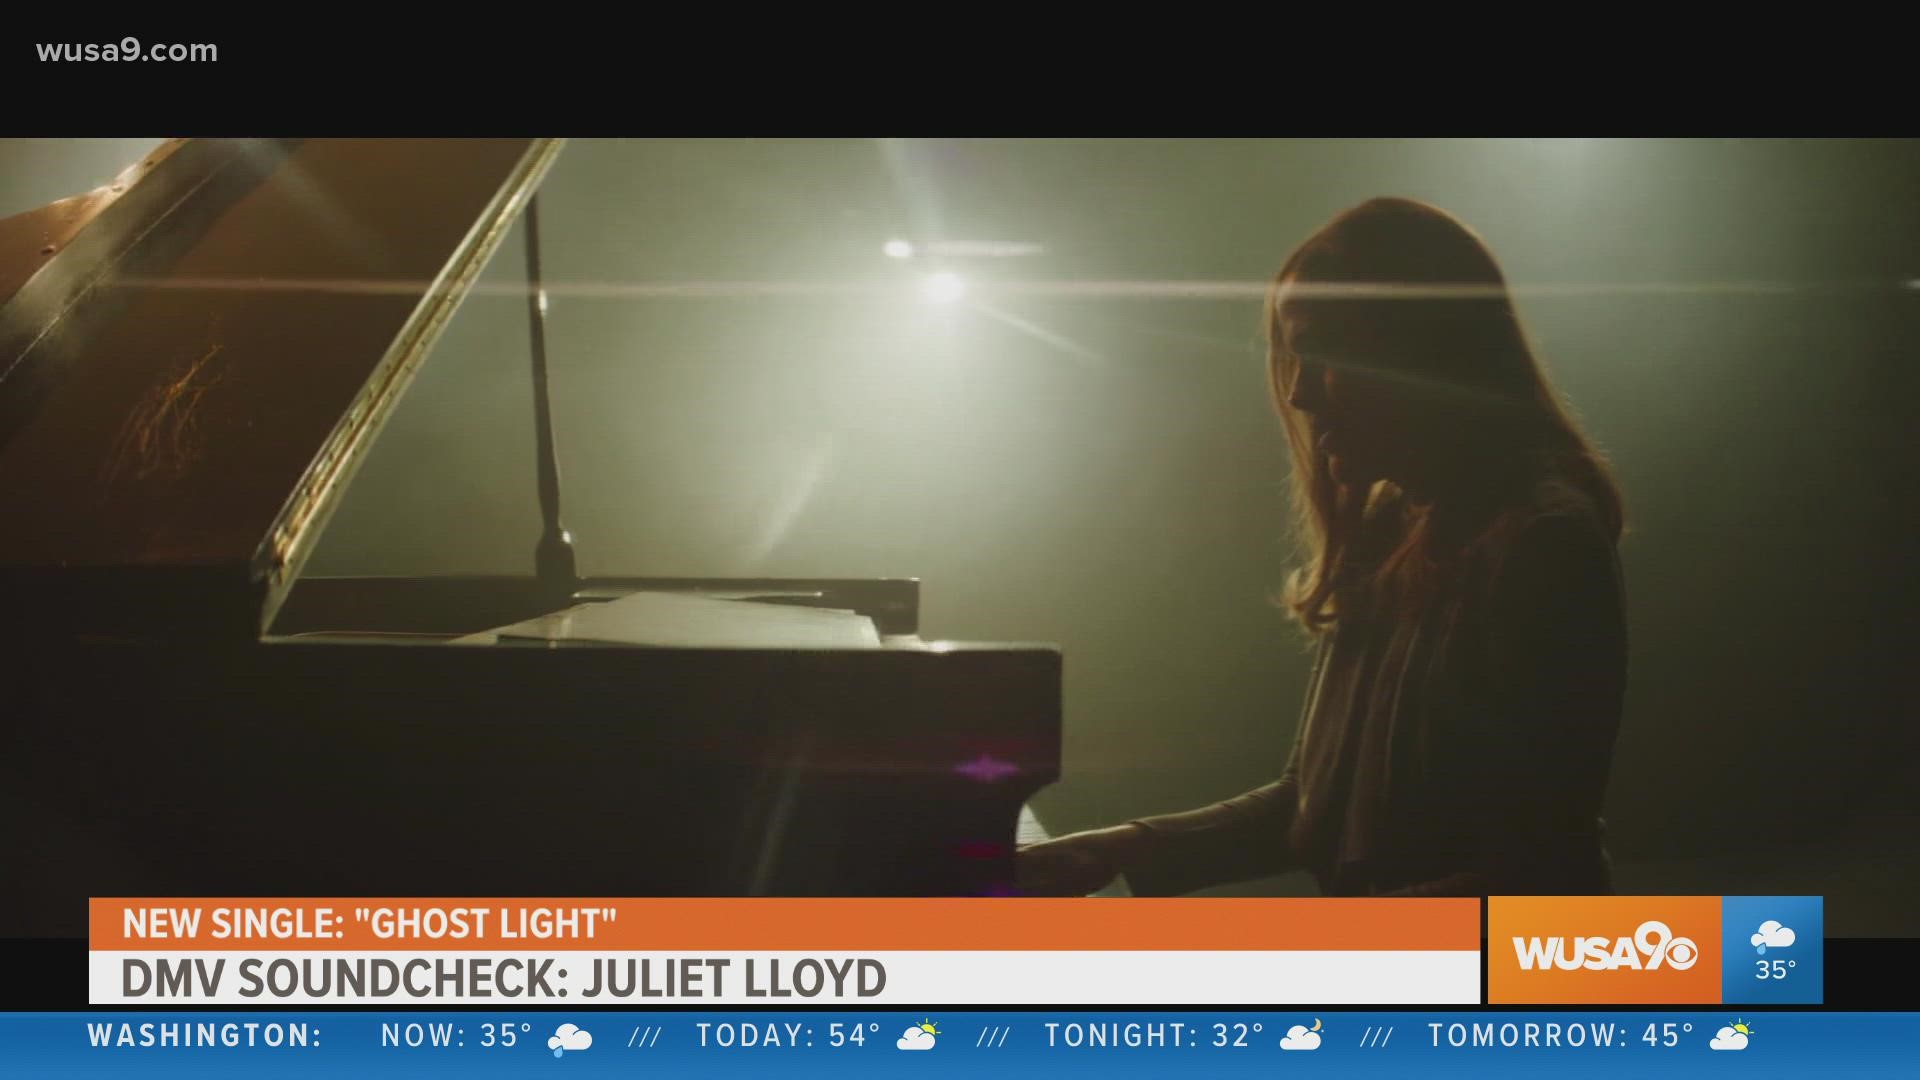 In this week's DMV Soundcheck we feature Juliet Lloyd and her new single "Ghost Light". 100% of the proceeds from the song are donated to the Theatre Lab.